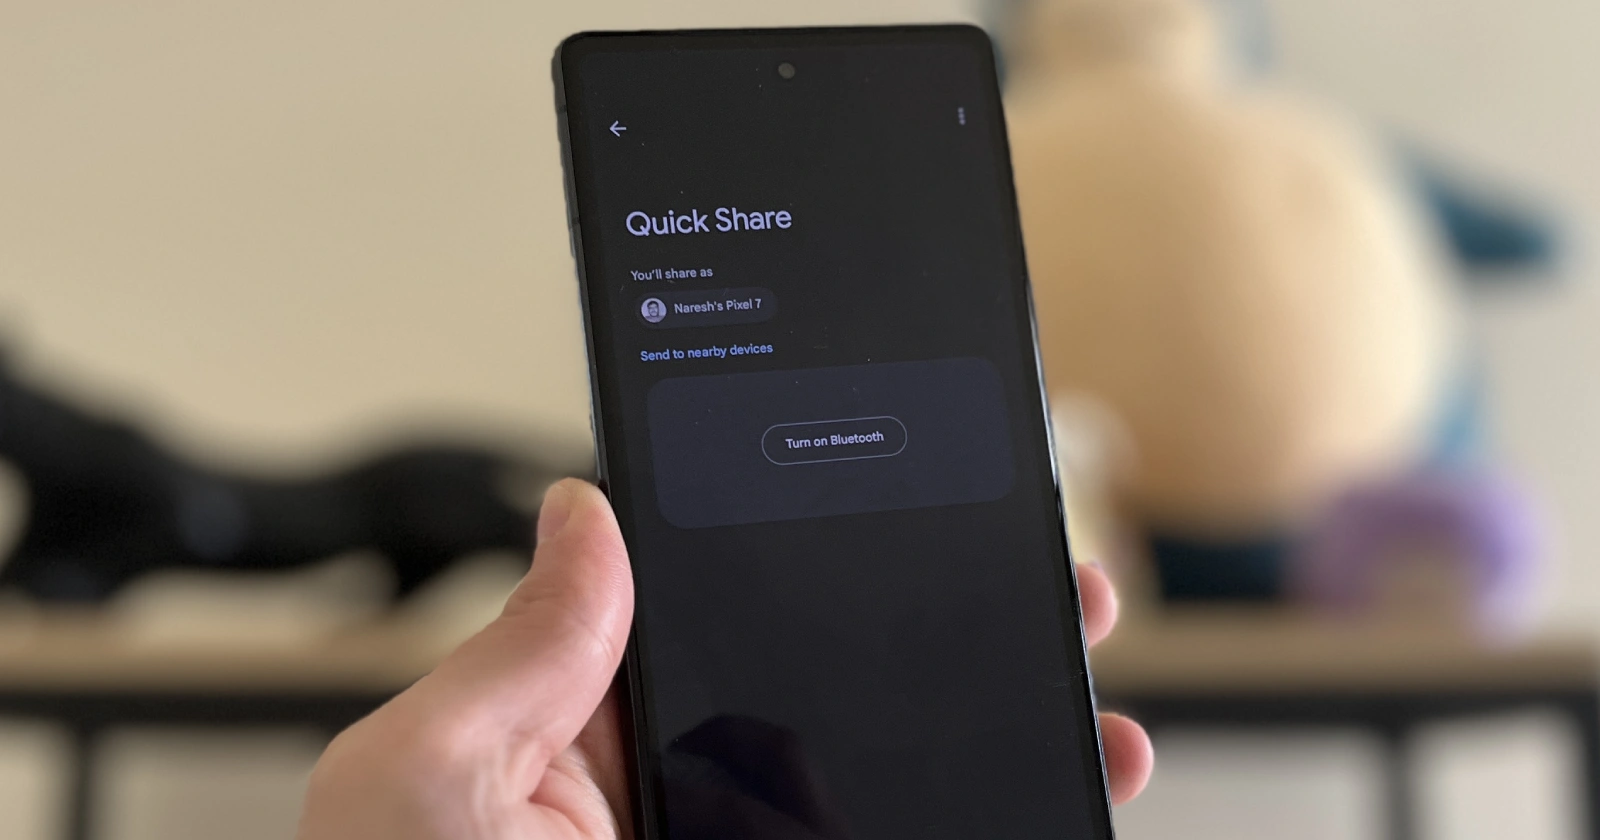 Quick Share transfer progress animation refreshed with new Material Design 3 changes